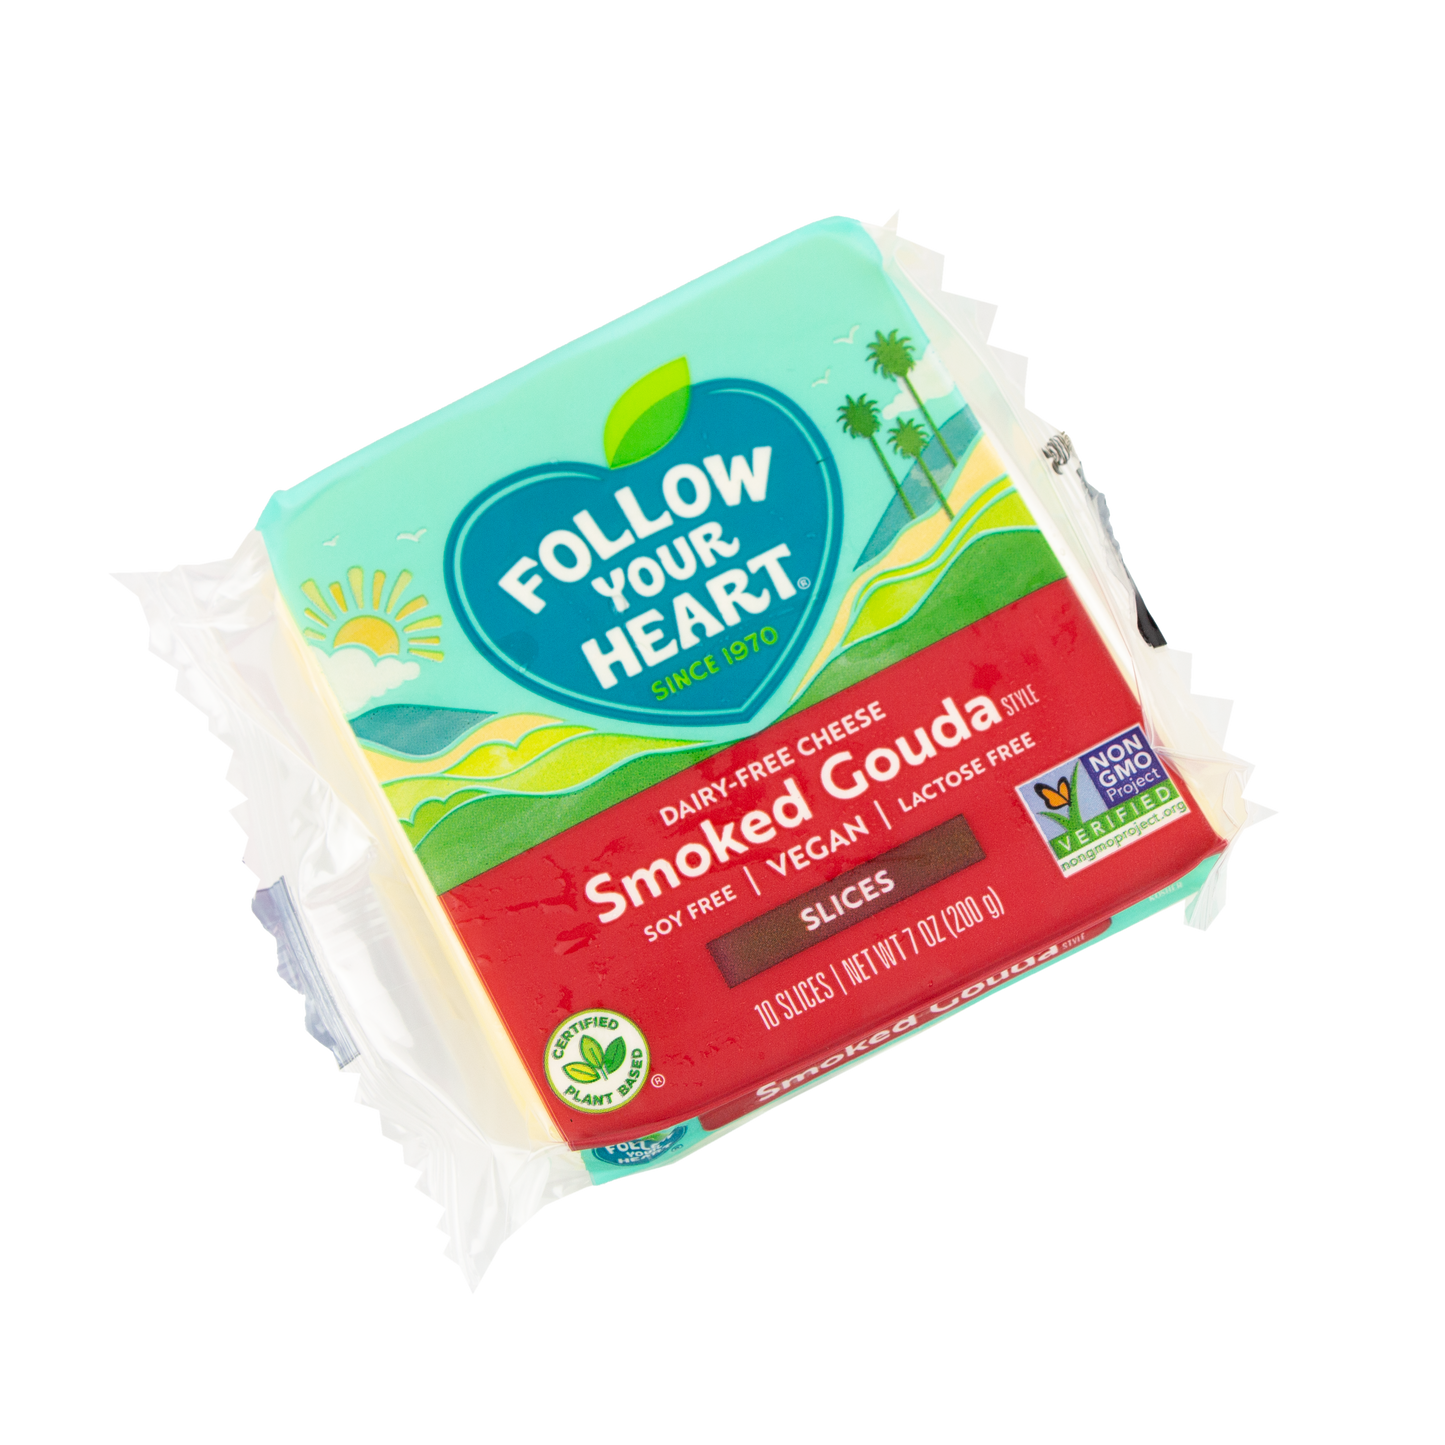 Follow Your Heart - Vegan Cheese Smoked Gouda Slices (Pick-Up Store Only)